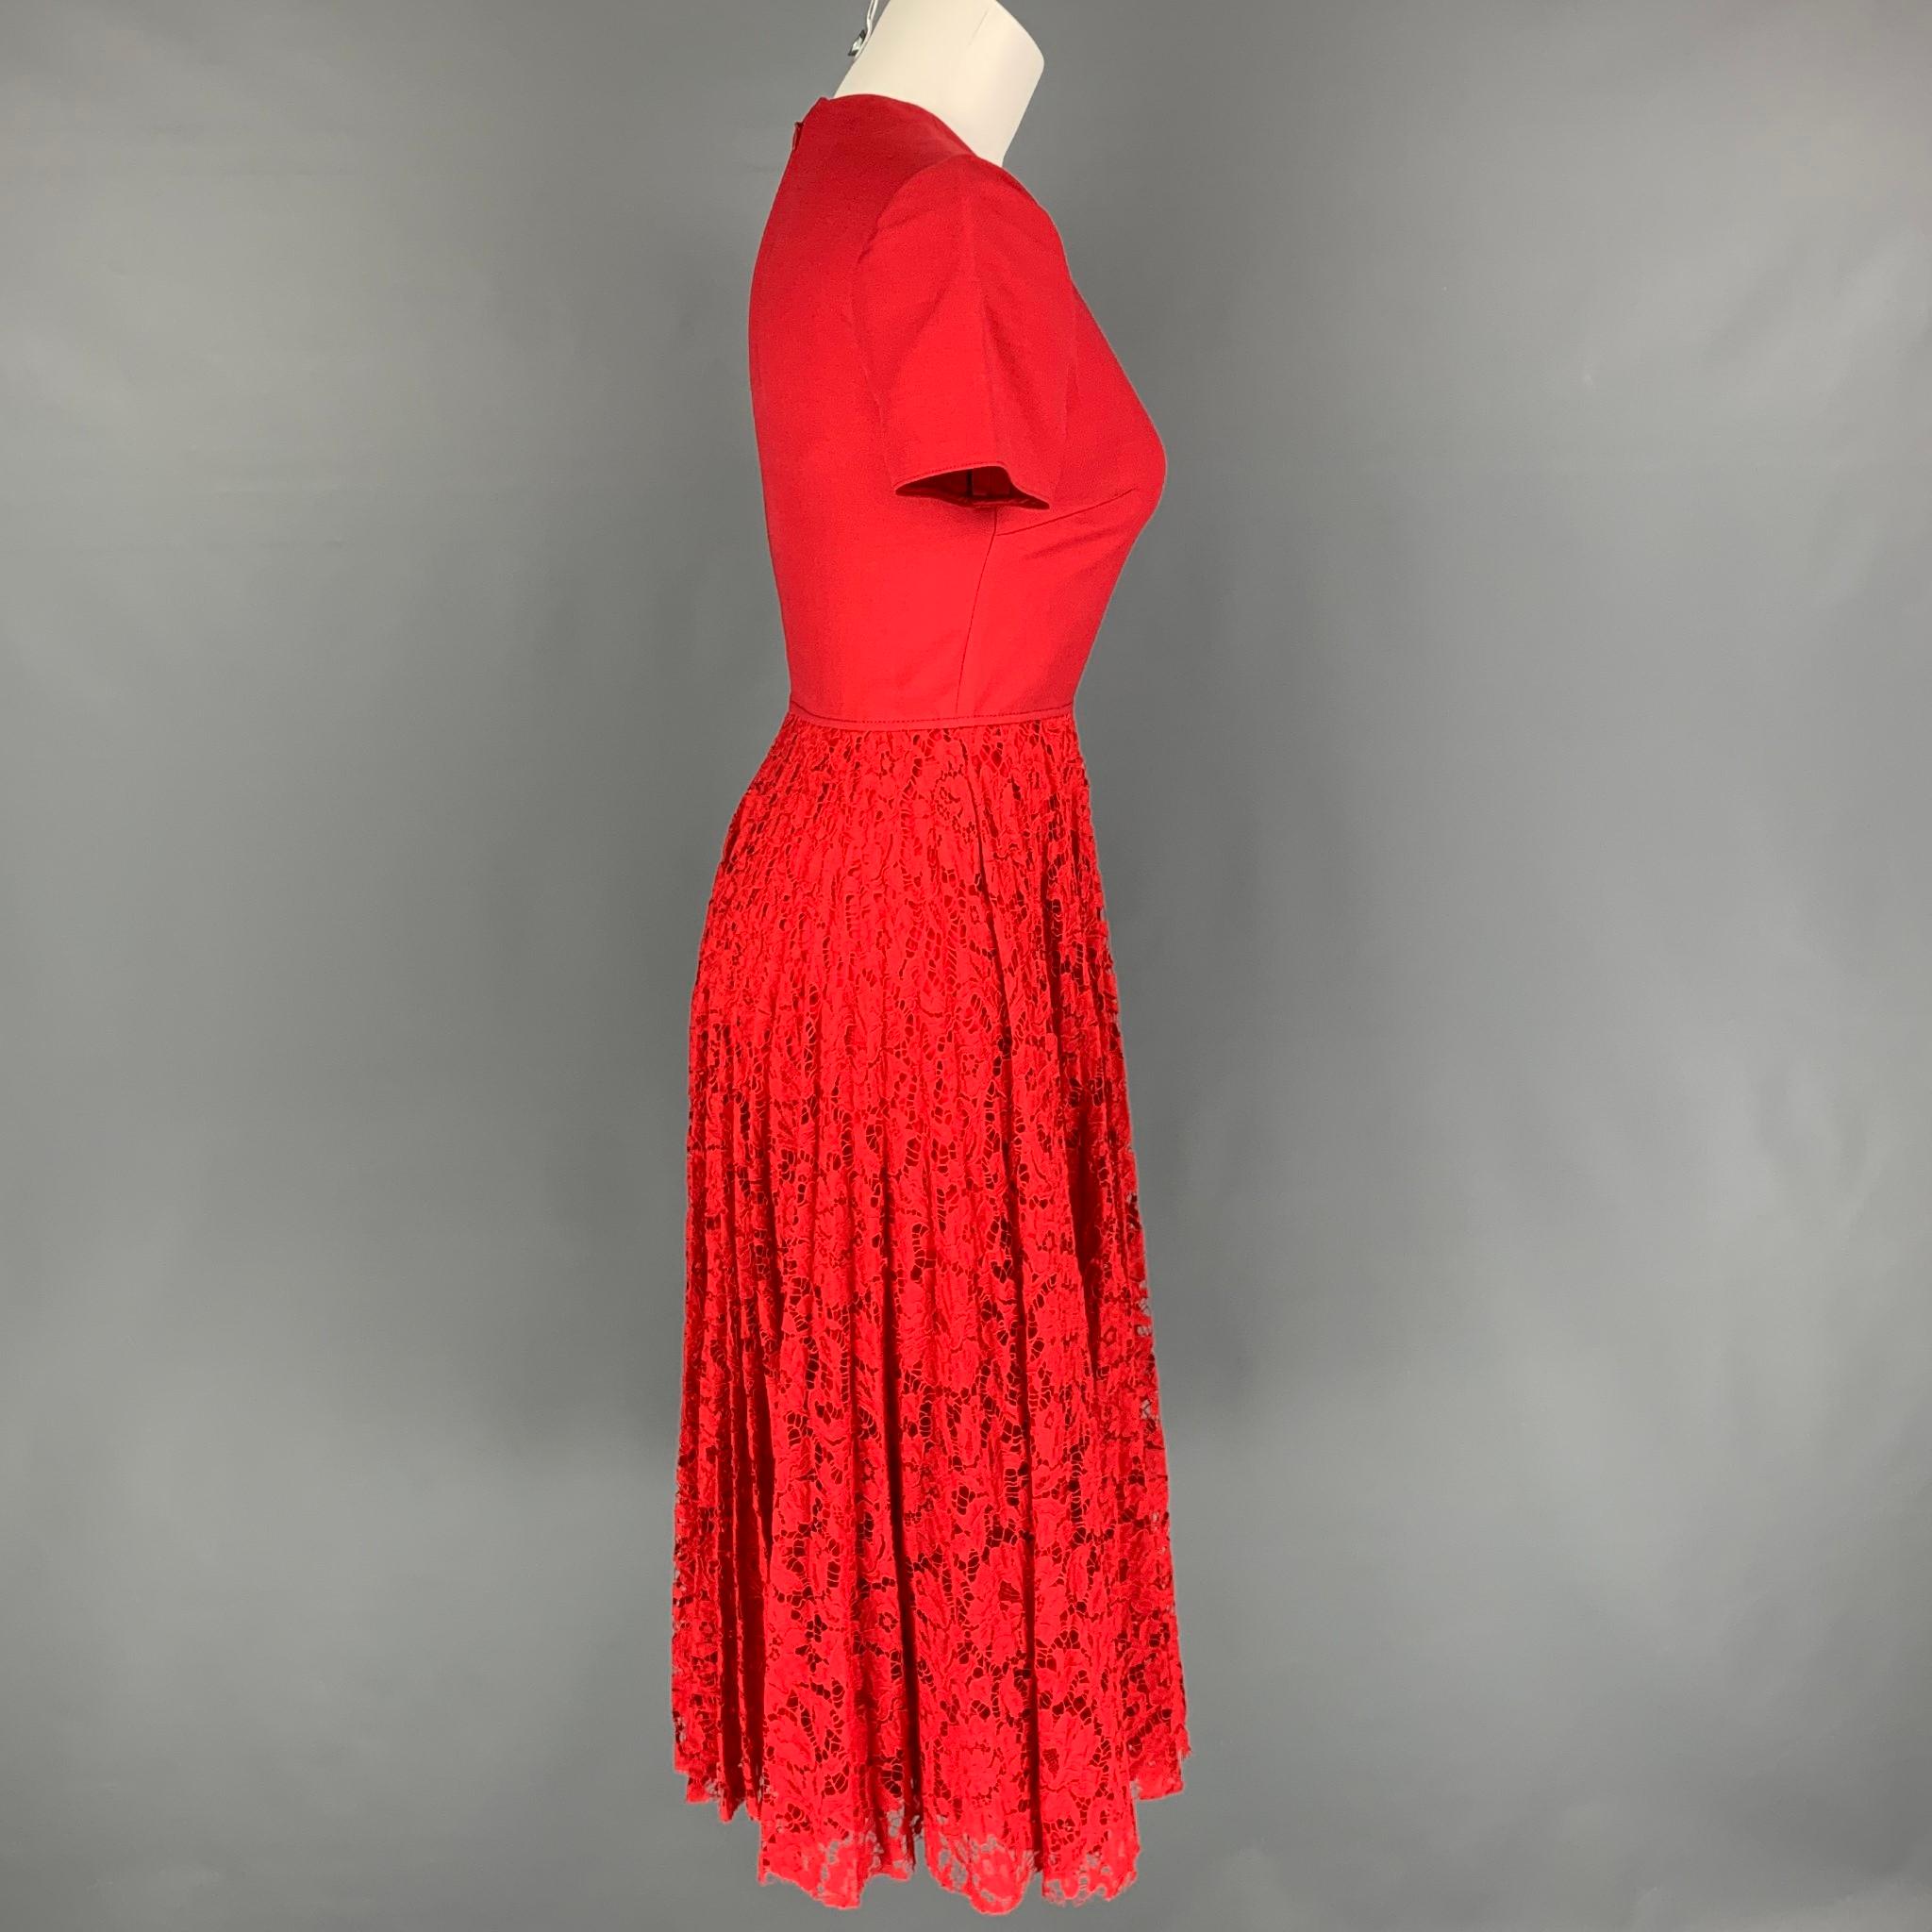 VALENTINO Pre-Fall 19 dress comes in a red lace viscose blend featuring a fitted bodice, pleated lace skirt, concealed hook & zip fastening at back. Made in Italy.

Very Good Pre-Owned Condition.
Marked: 36
Original Retail Price: